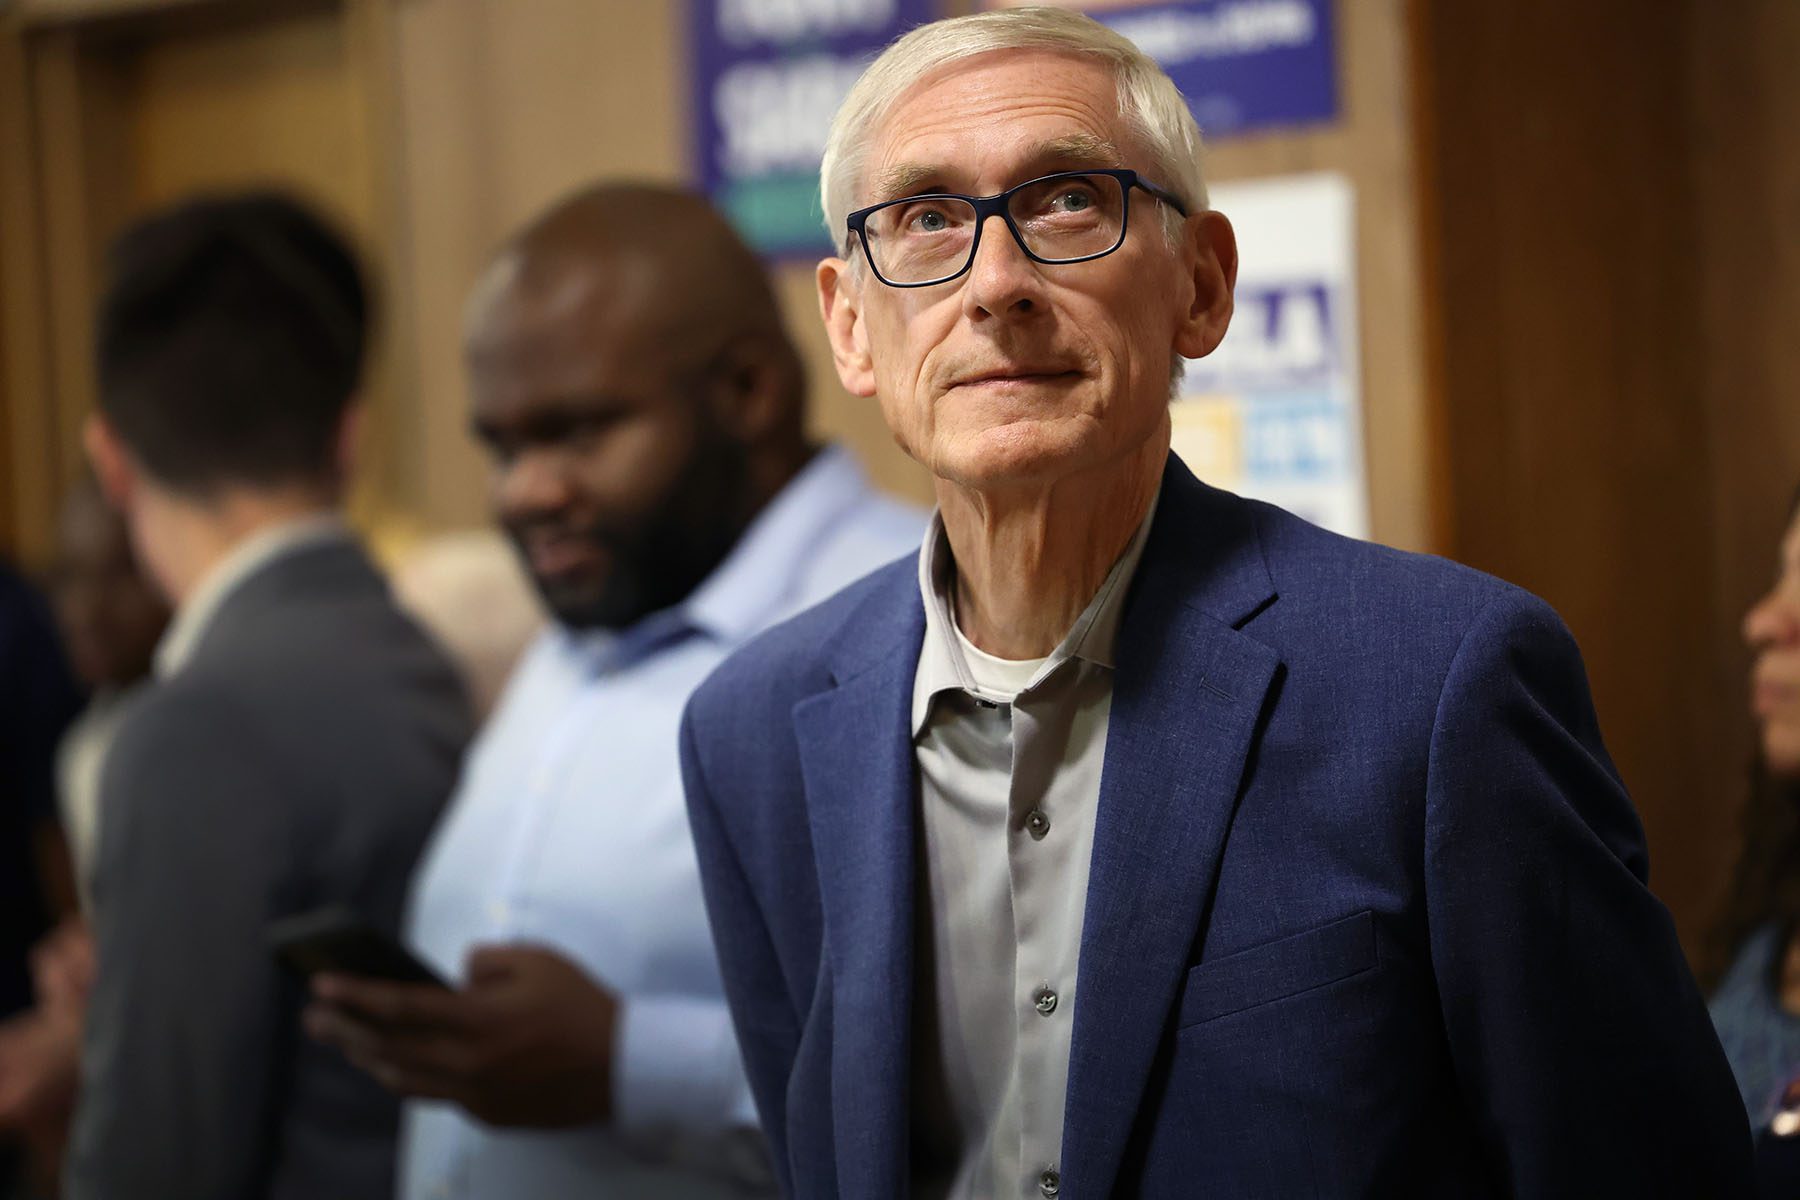 Tony Evers waits to be introduced during a campaign.